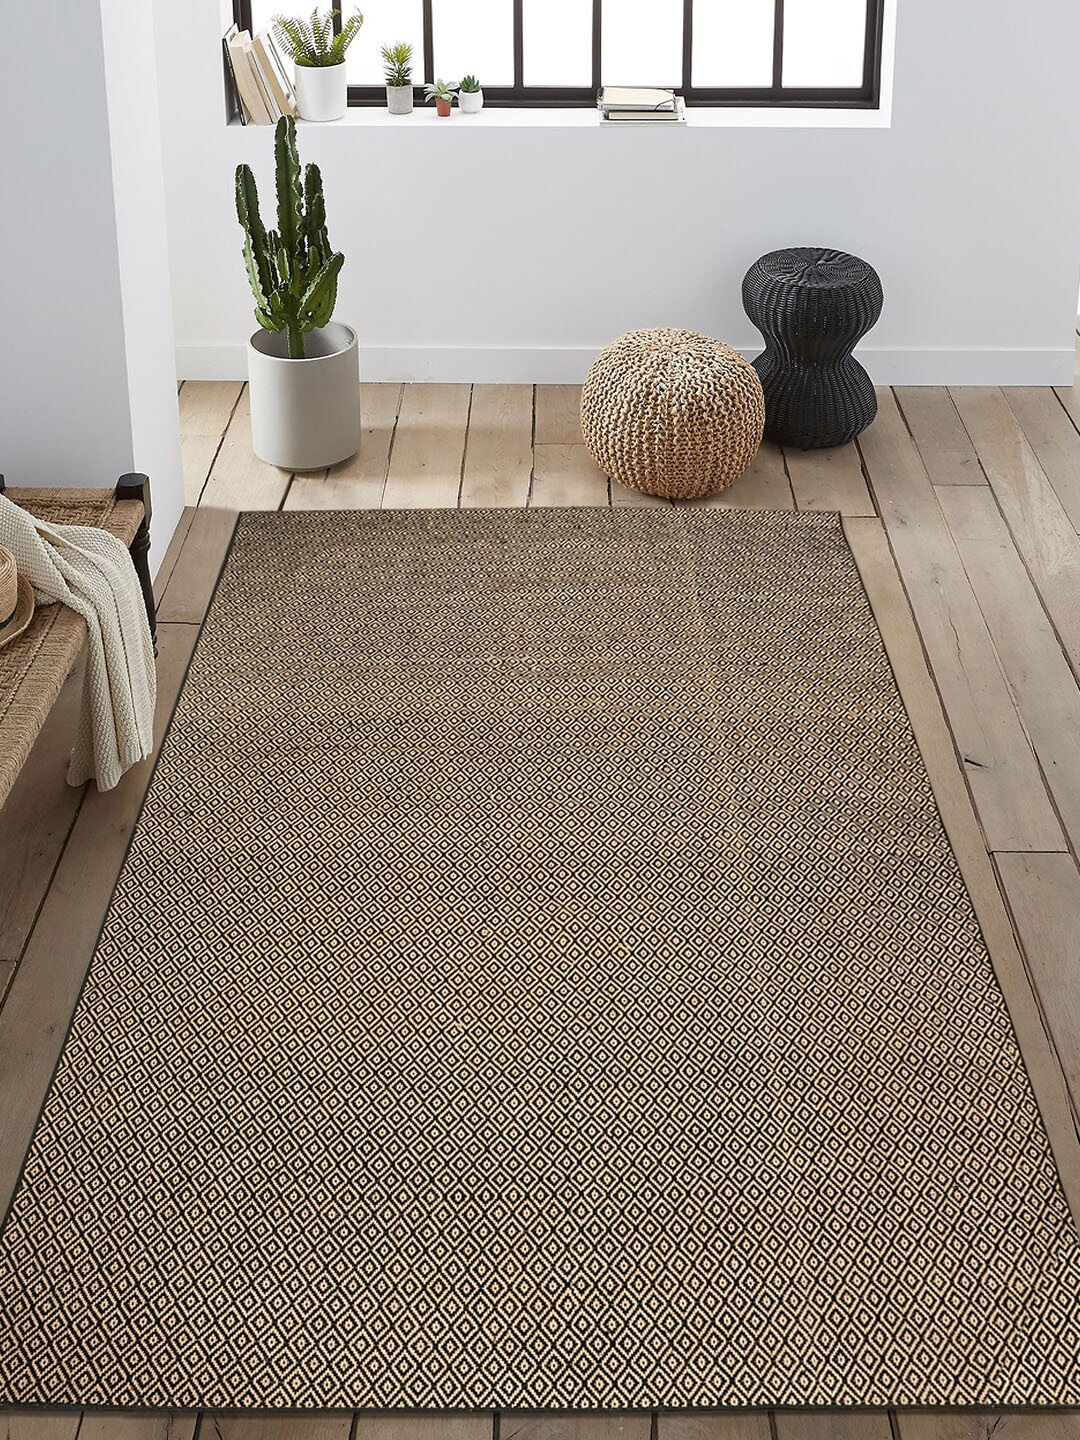 Saral Home Brown & Beige Woven-Design Anti-Skid Carpet Price in India